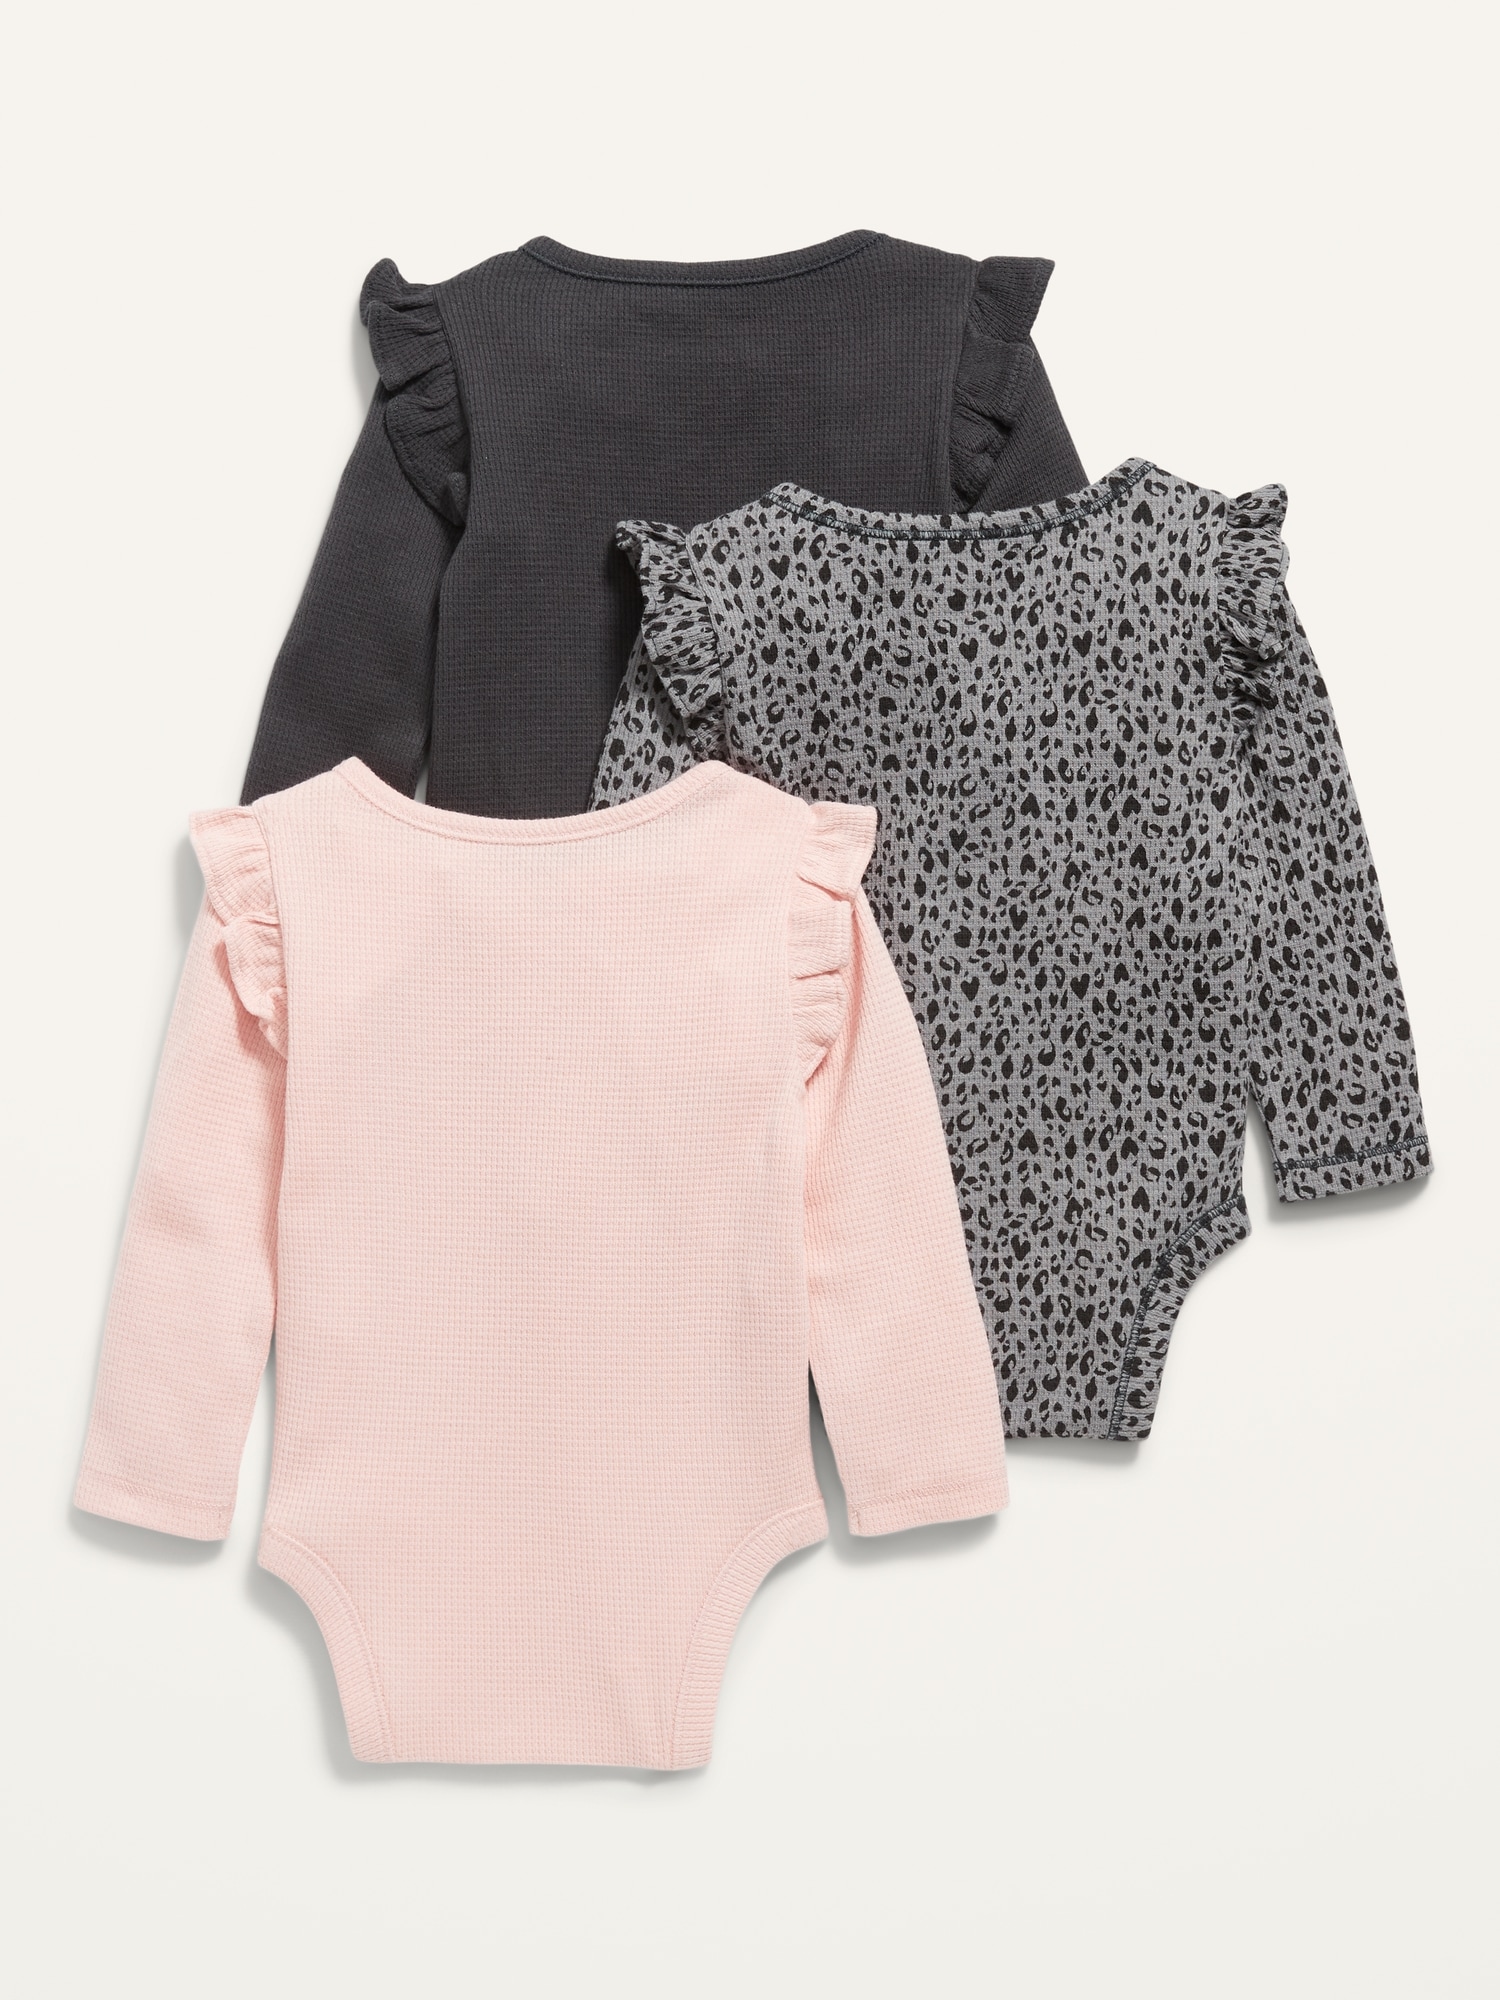 Ruffle-Trim Long-Sleeve Thermal-Knit Bodysuit 3-Pack for Baby | Old Navy